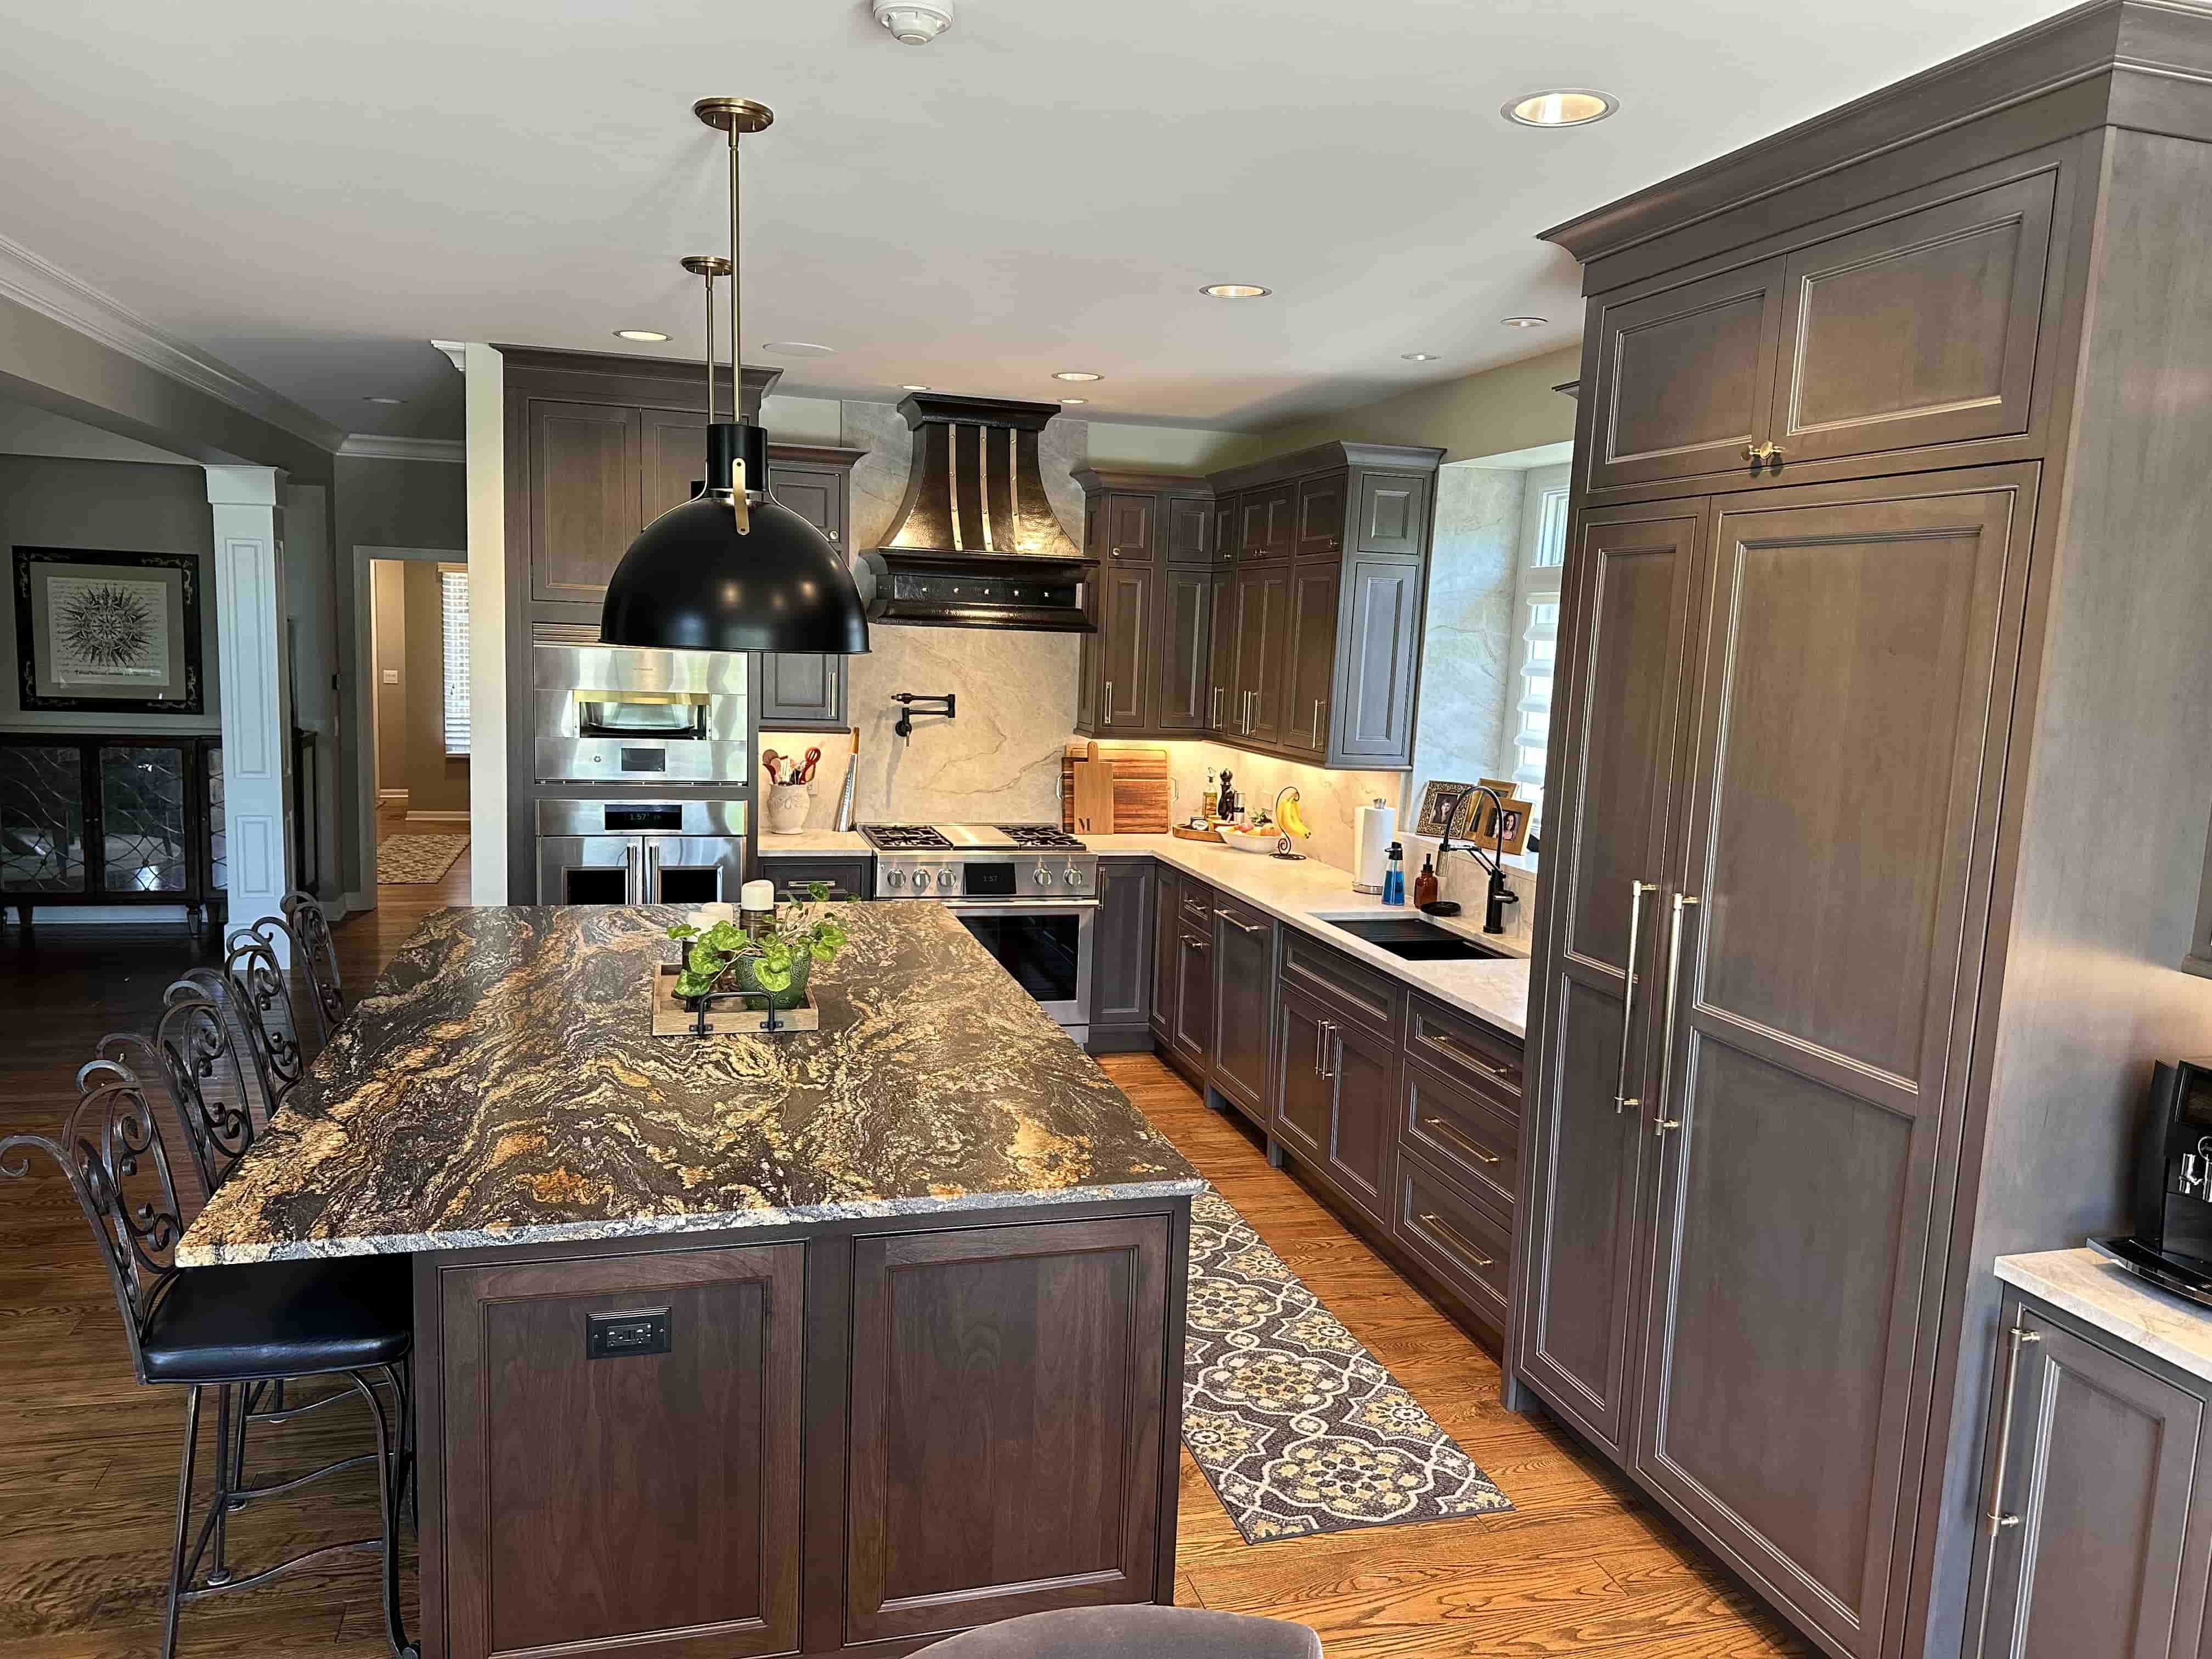 CopperSmith Signature SX11 Wall Mount Blackened Brass Range Hood with Brushed Stainless Steel Straps and Polished Brass Rivets in a cottage style kitchen with marble countertops wood cabinets and white marble backsplash